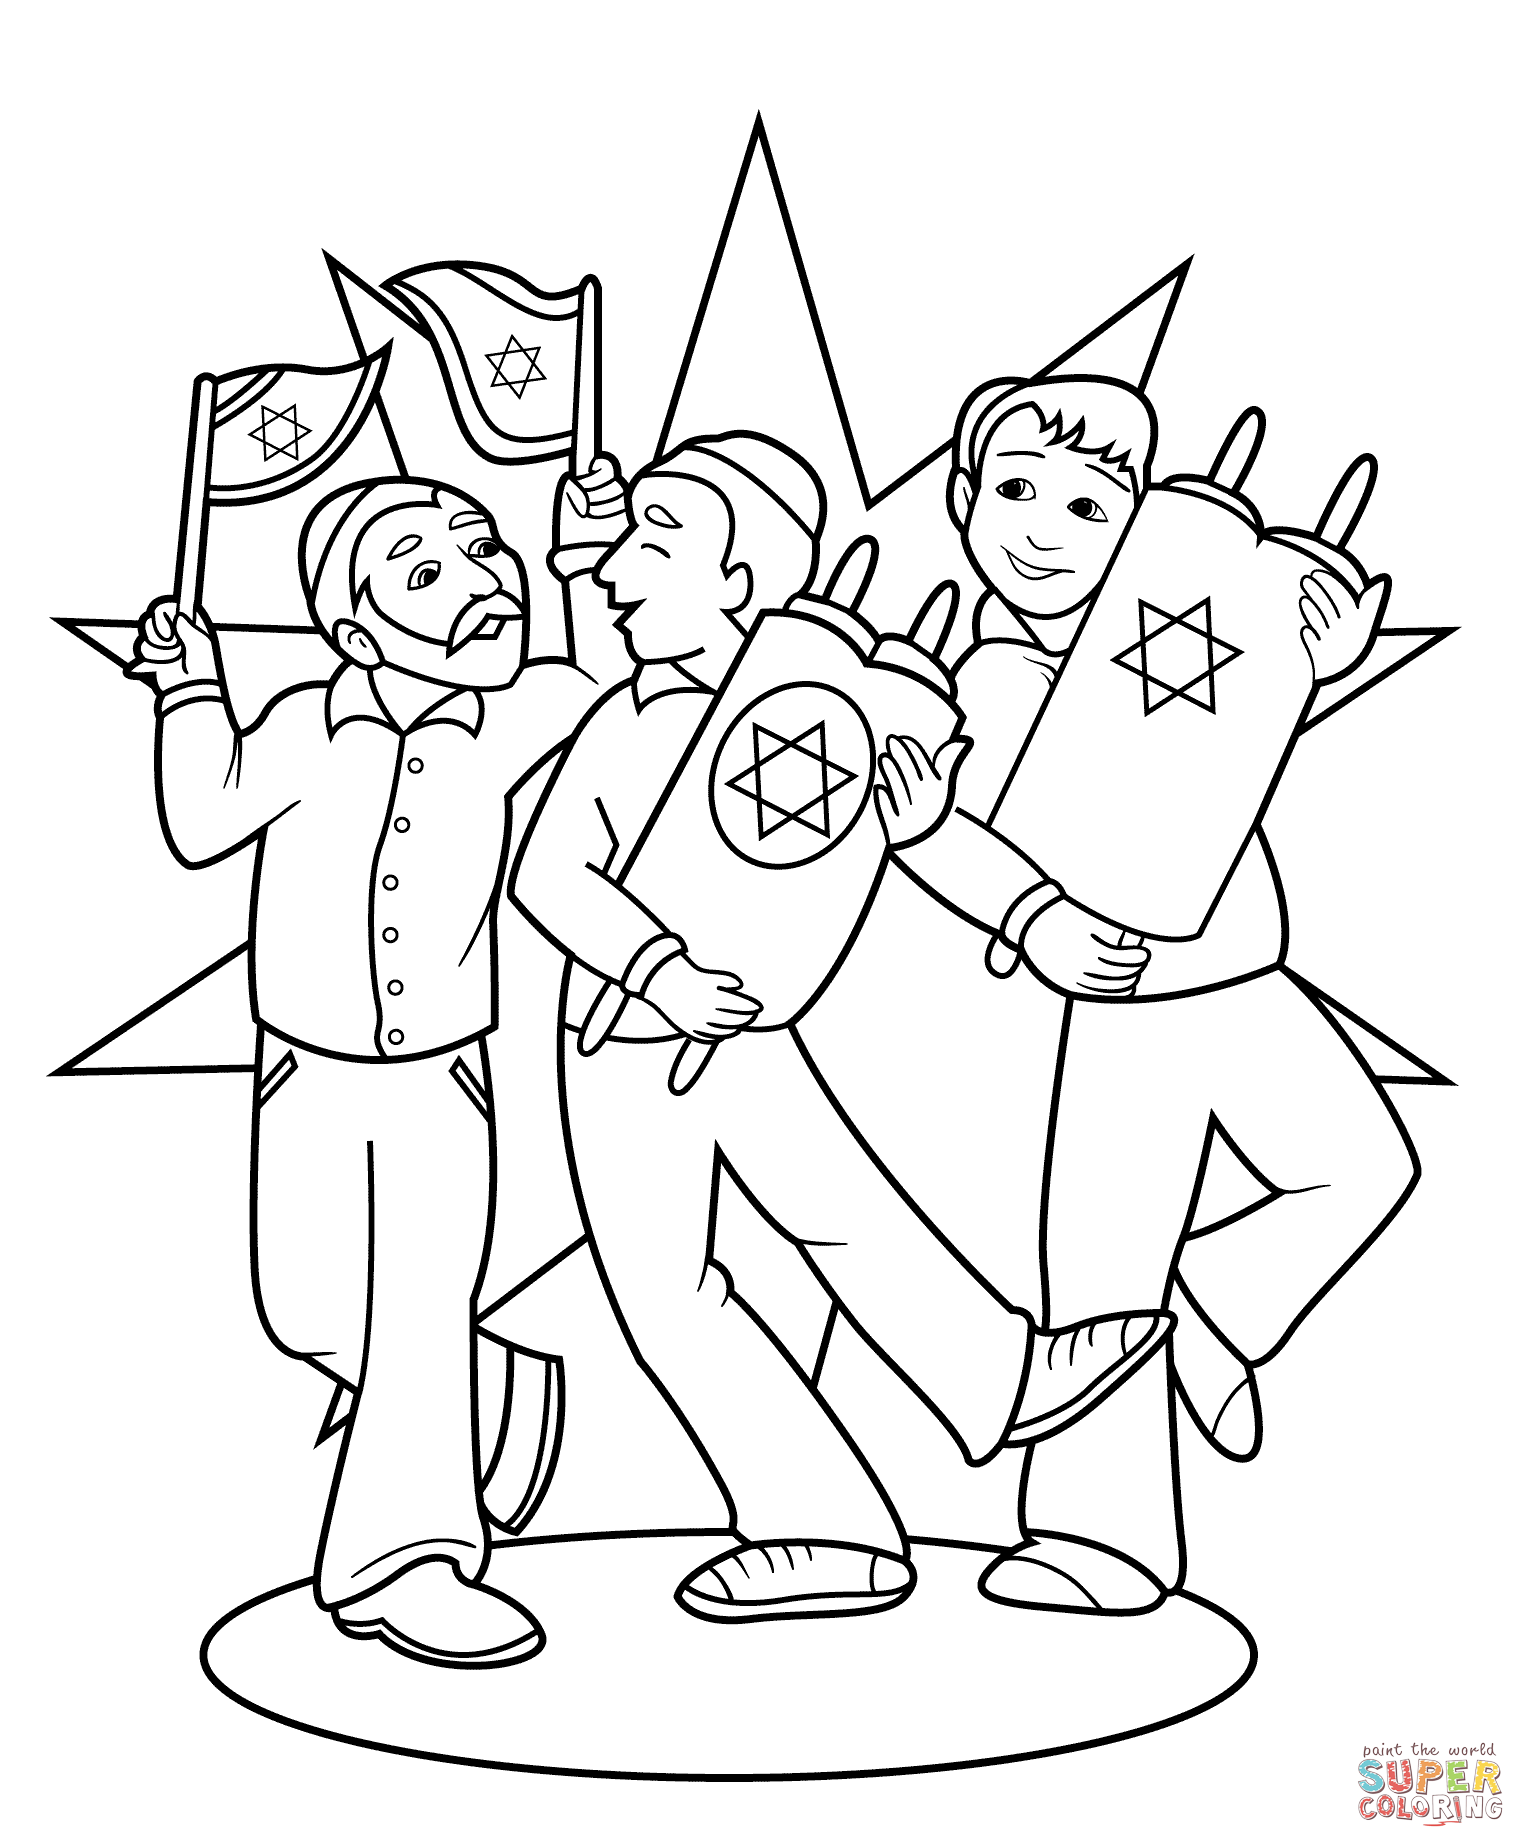 Simchat torah celebration coloring page free printable coloring pages